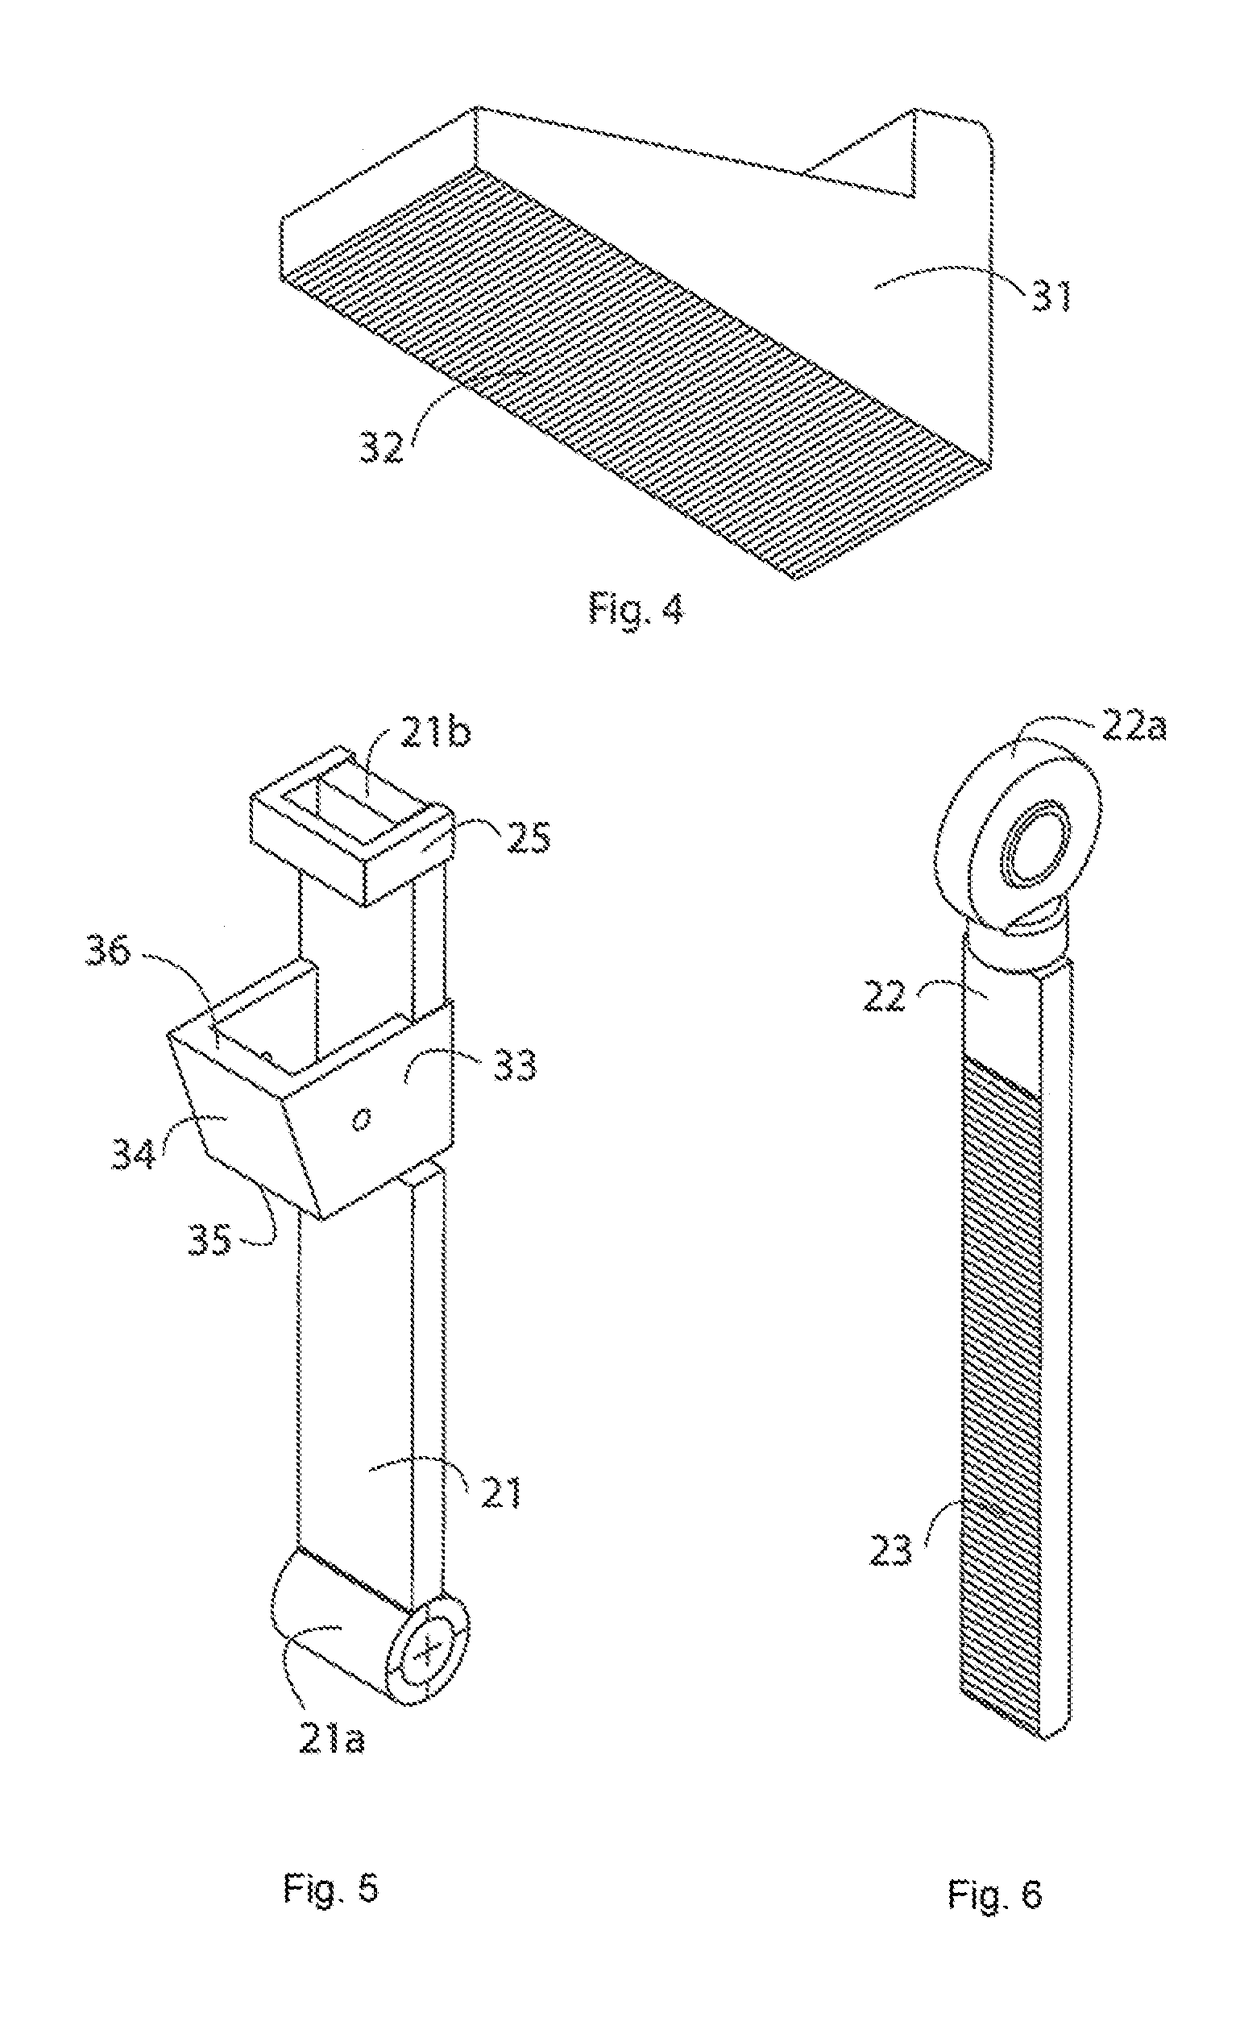 Device for locking a belt at predetermined belt tension